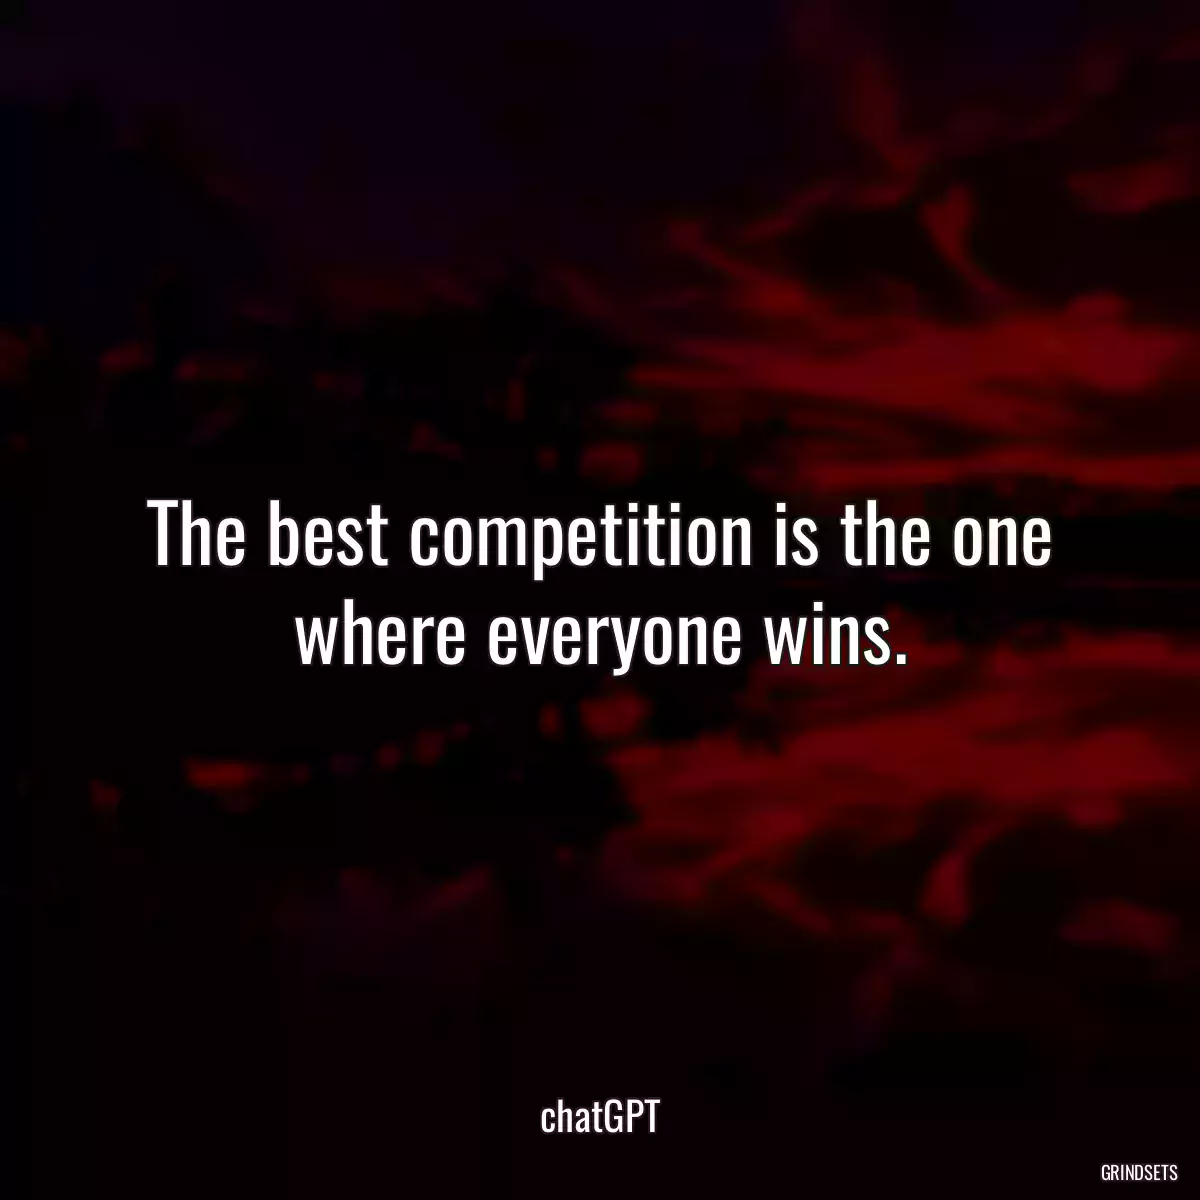 The best competition is the one where everyone wins.